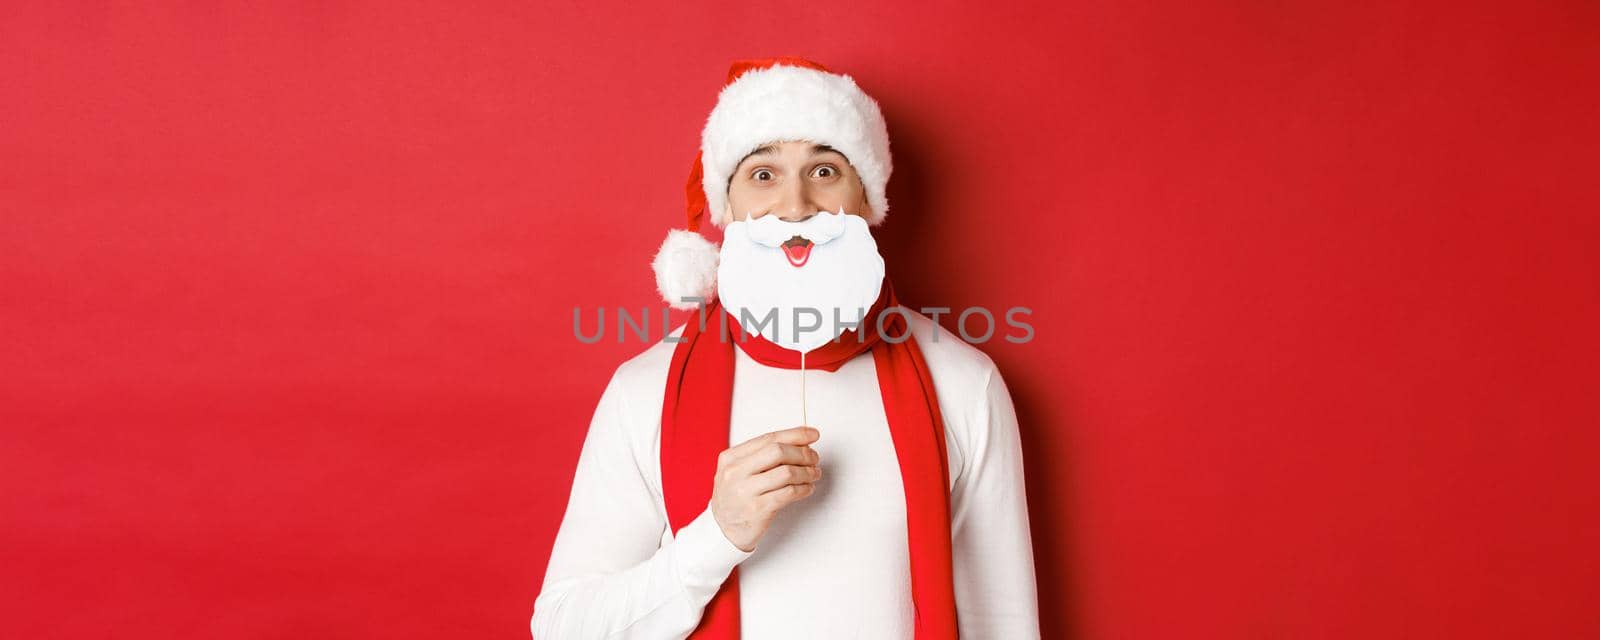 Concept of christmas, winter holidays and celebration. Portrait of funny man in santa hat, holding beard mask, enjoying new year party, standing over red background.